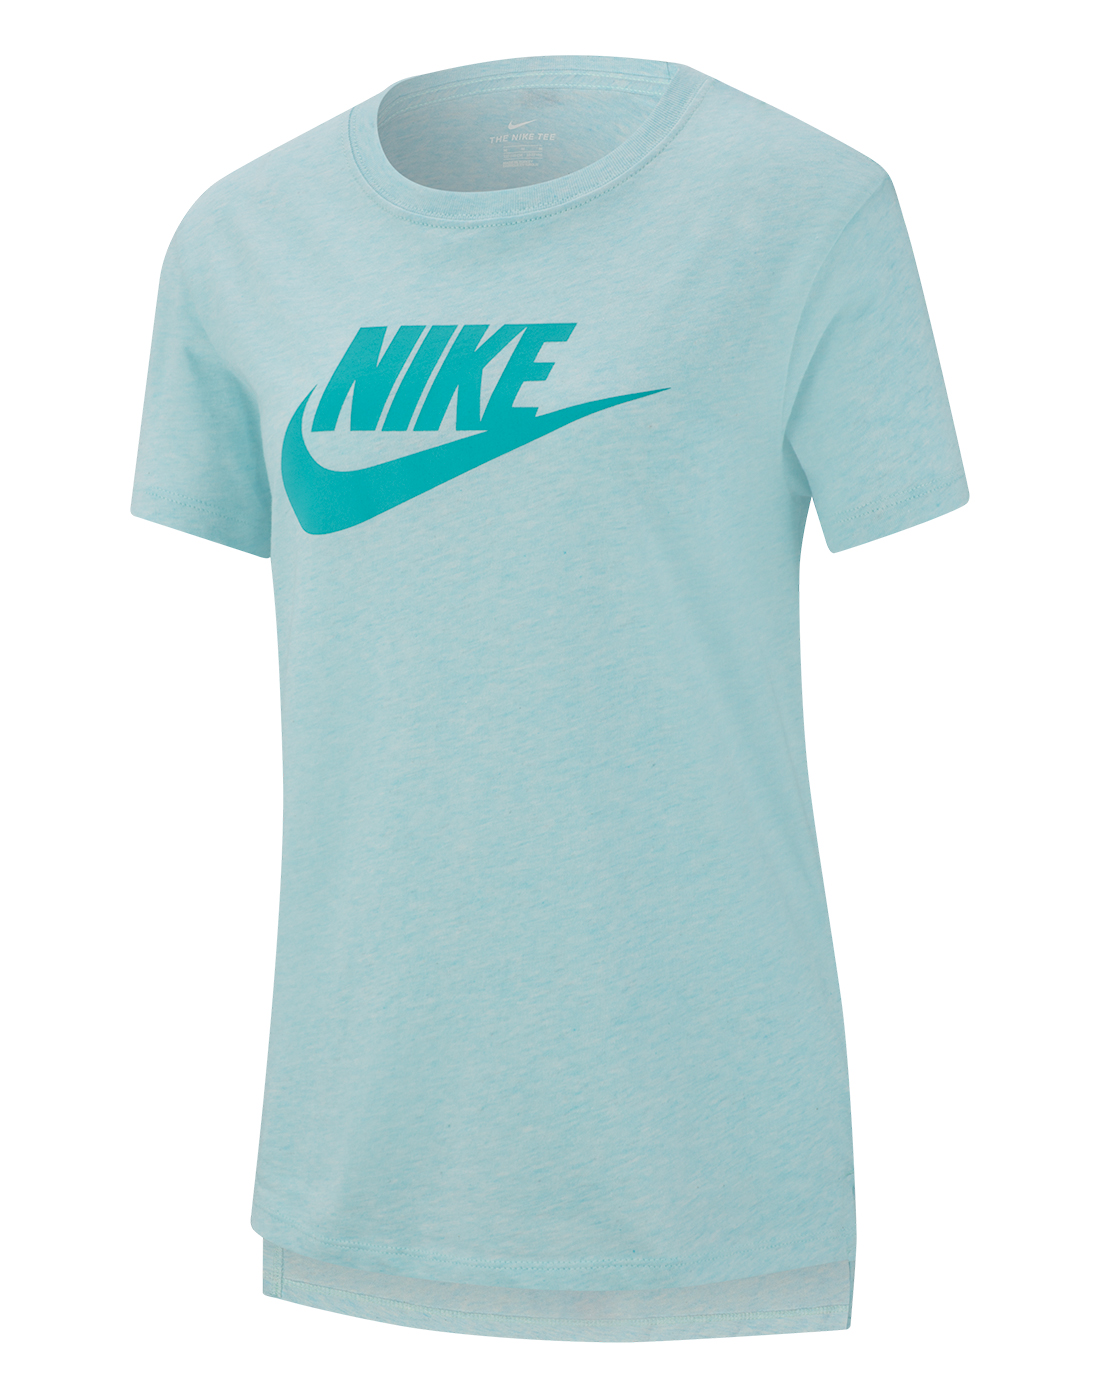 baby blue and red nike shirt